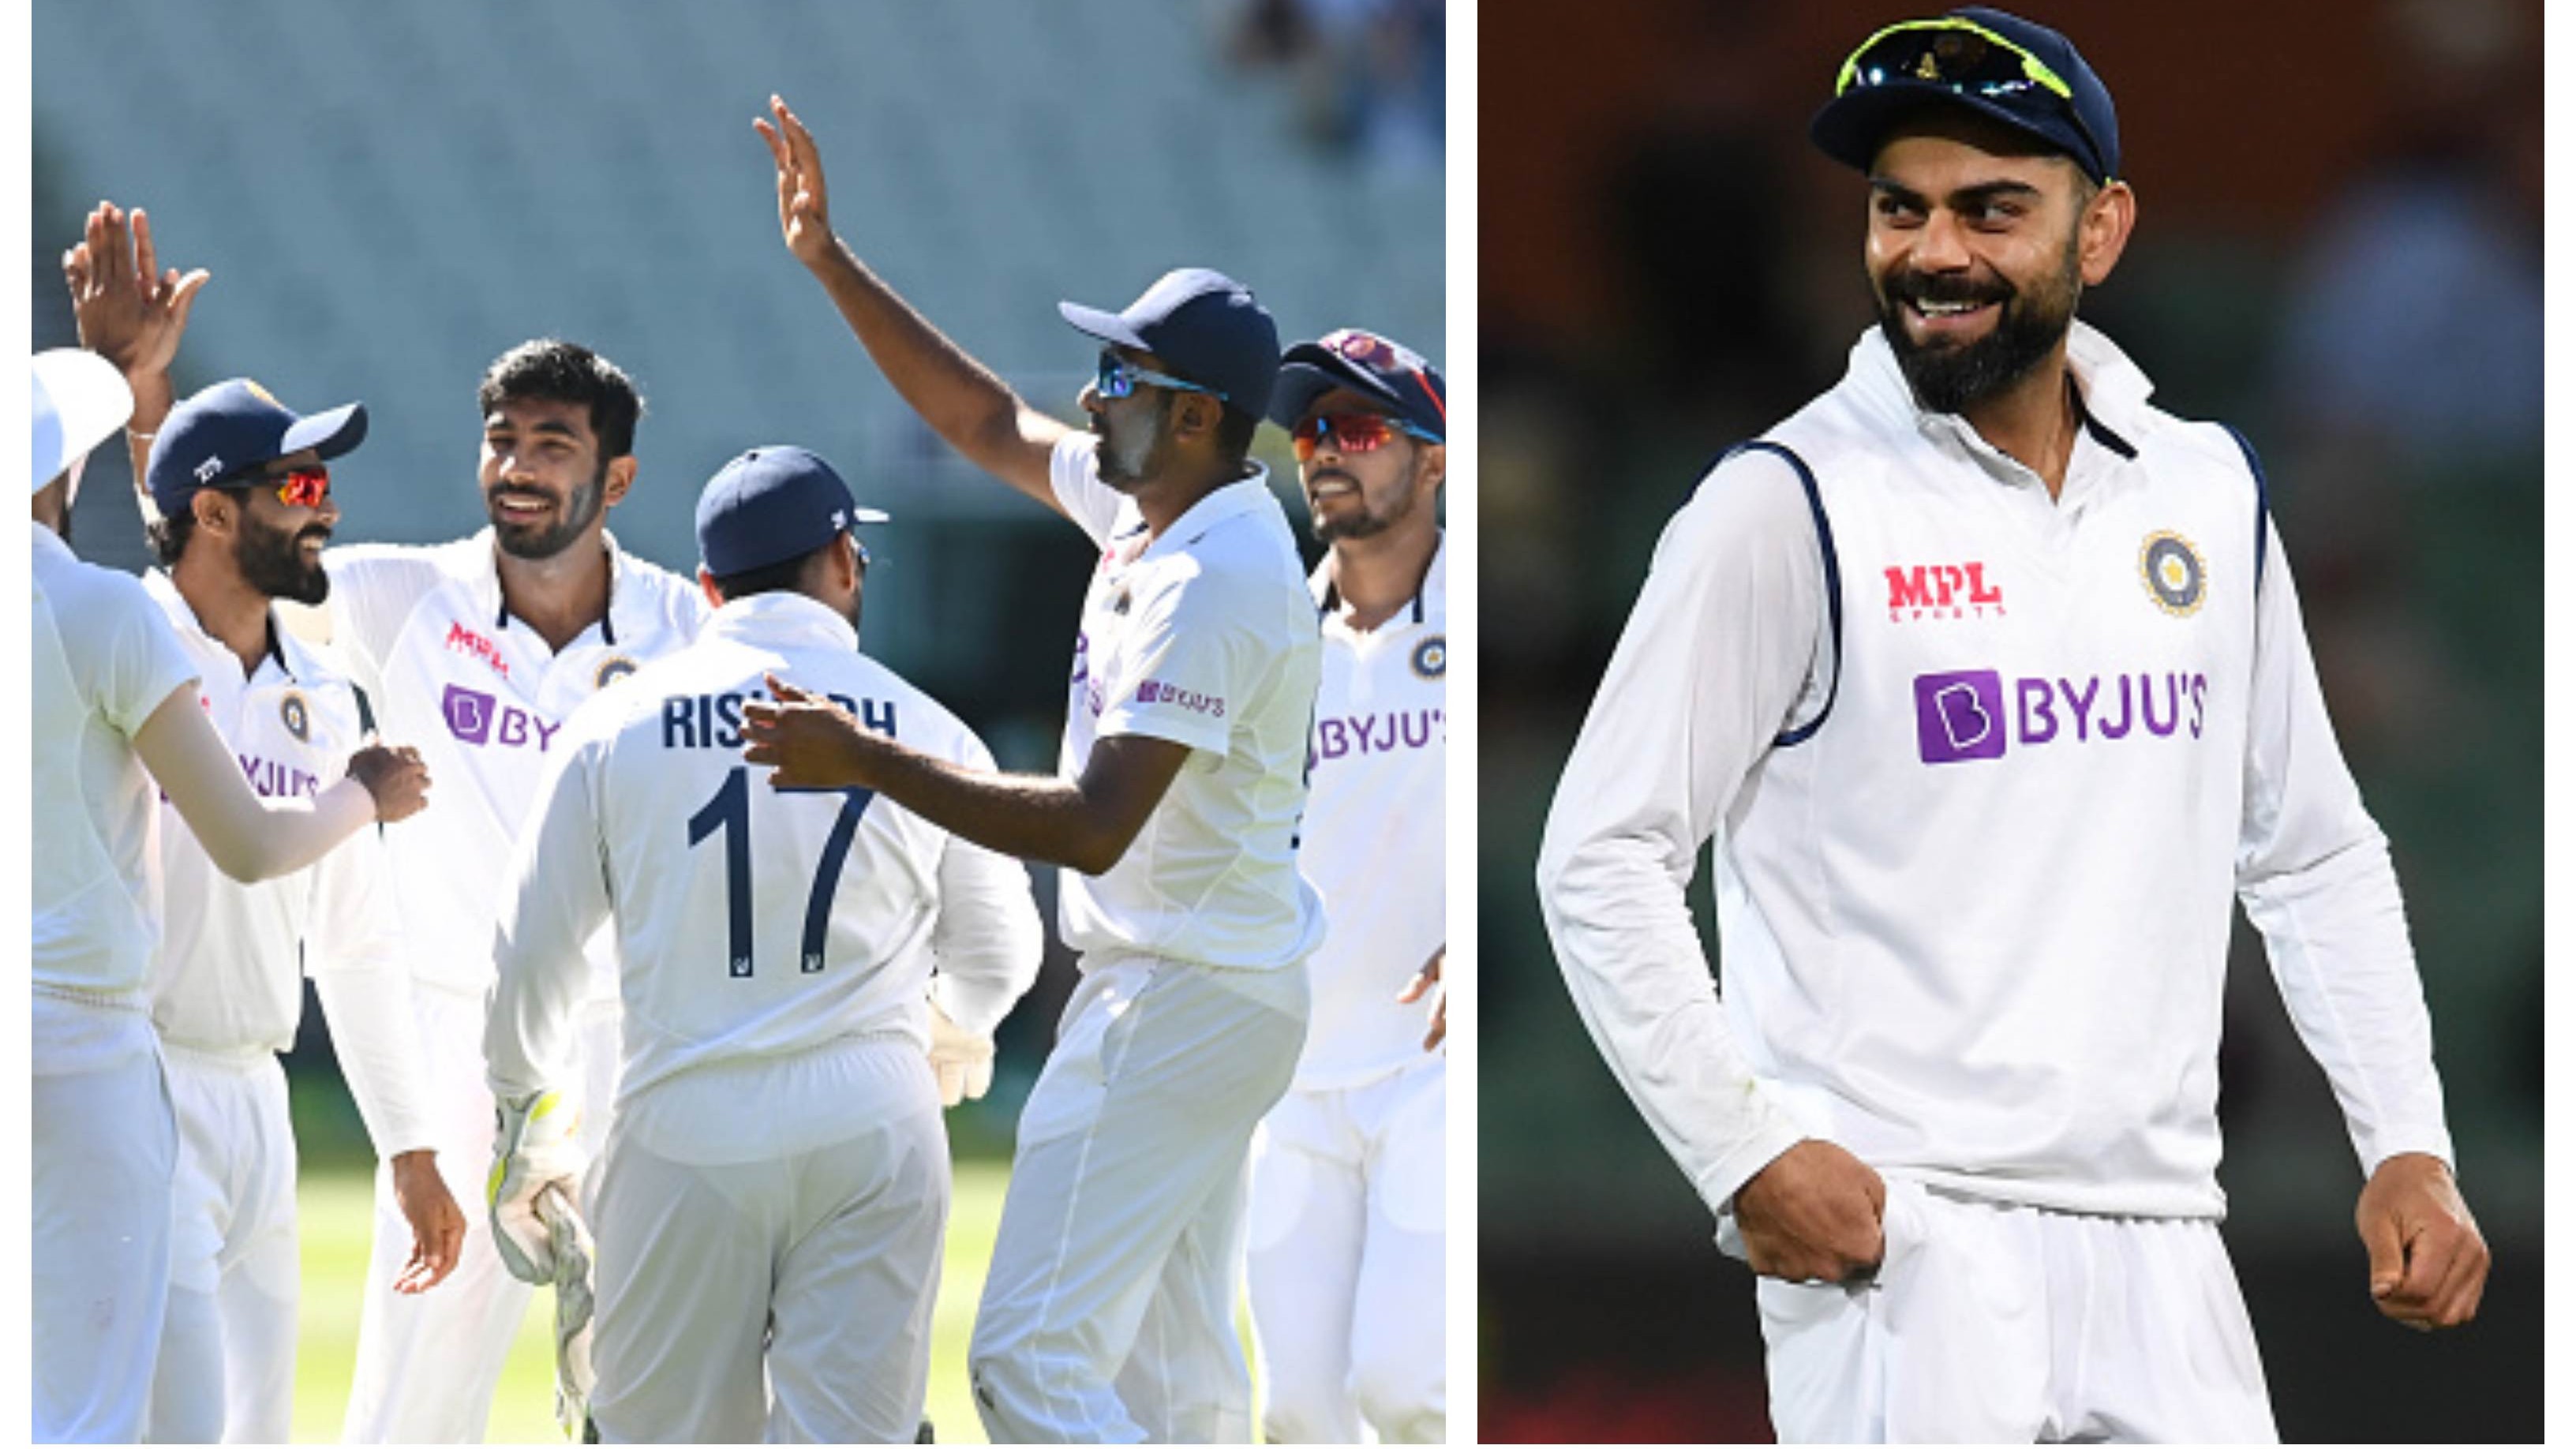 AUS v IND 2020-21: ‘Great display from the bowlers’, Virat Kohli reacts after India’s dominant show on Day 1